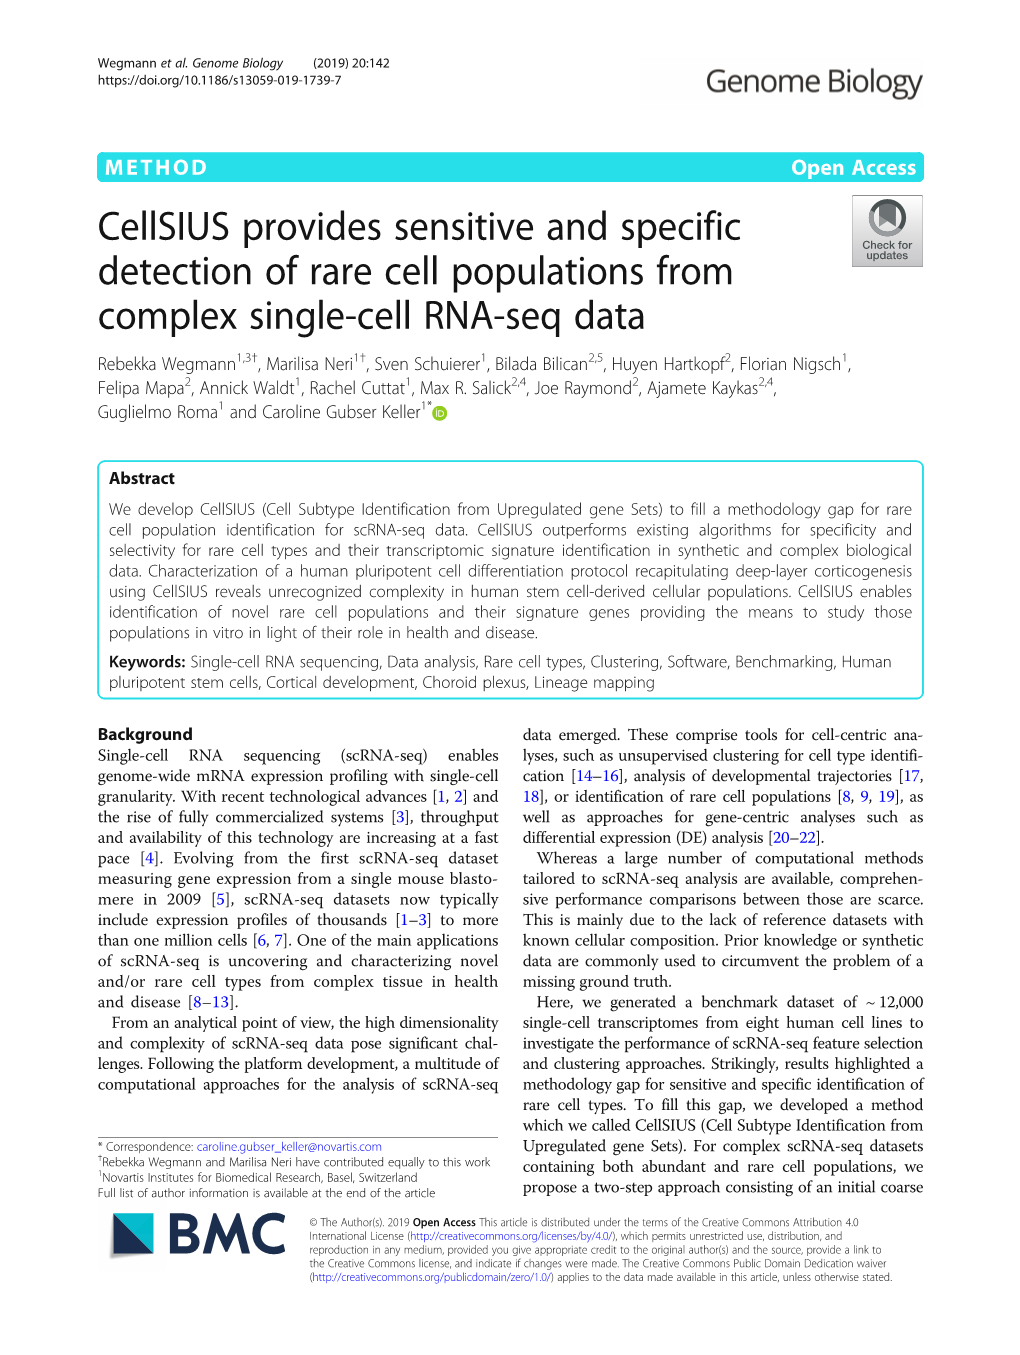 Cellsius Provides Sensitive and Specific Detection of Rare Cell